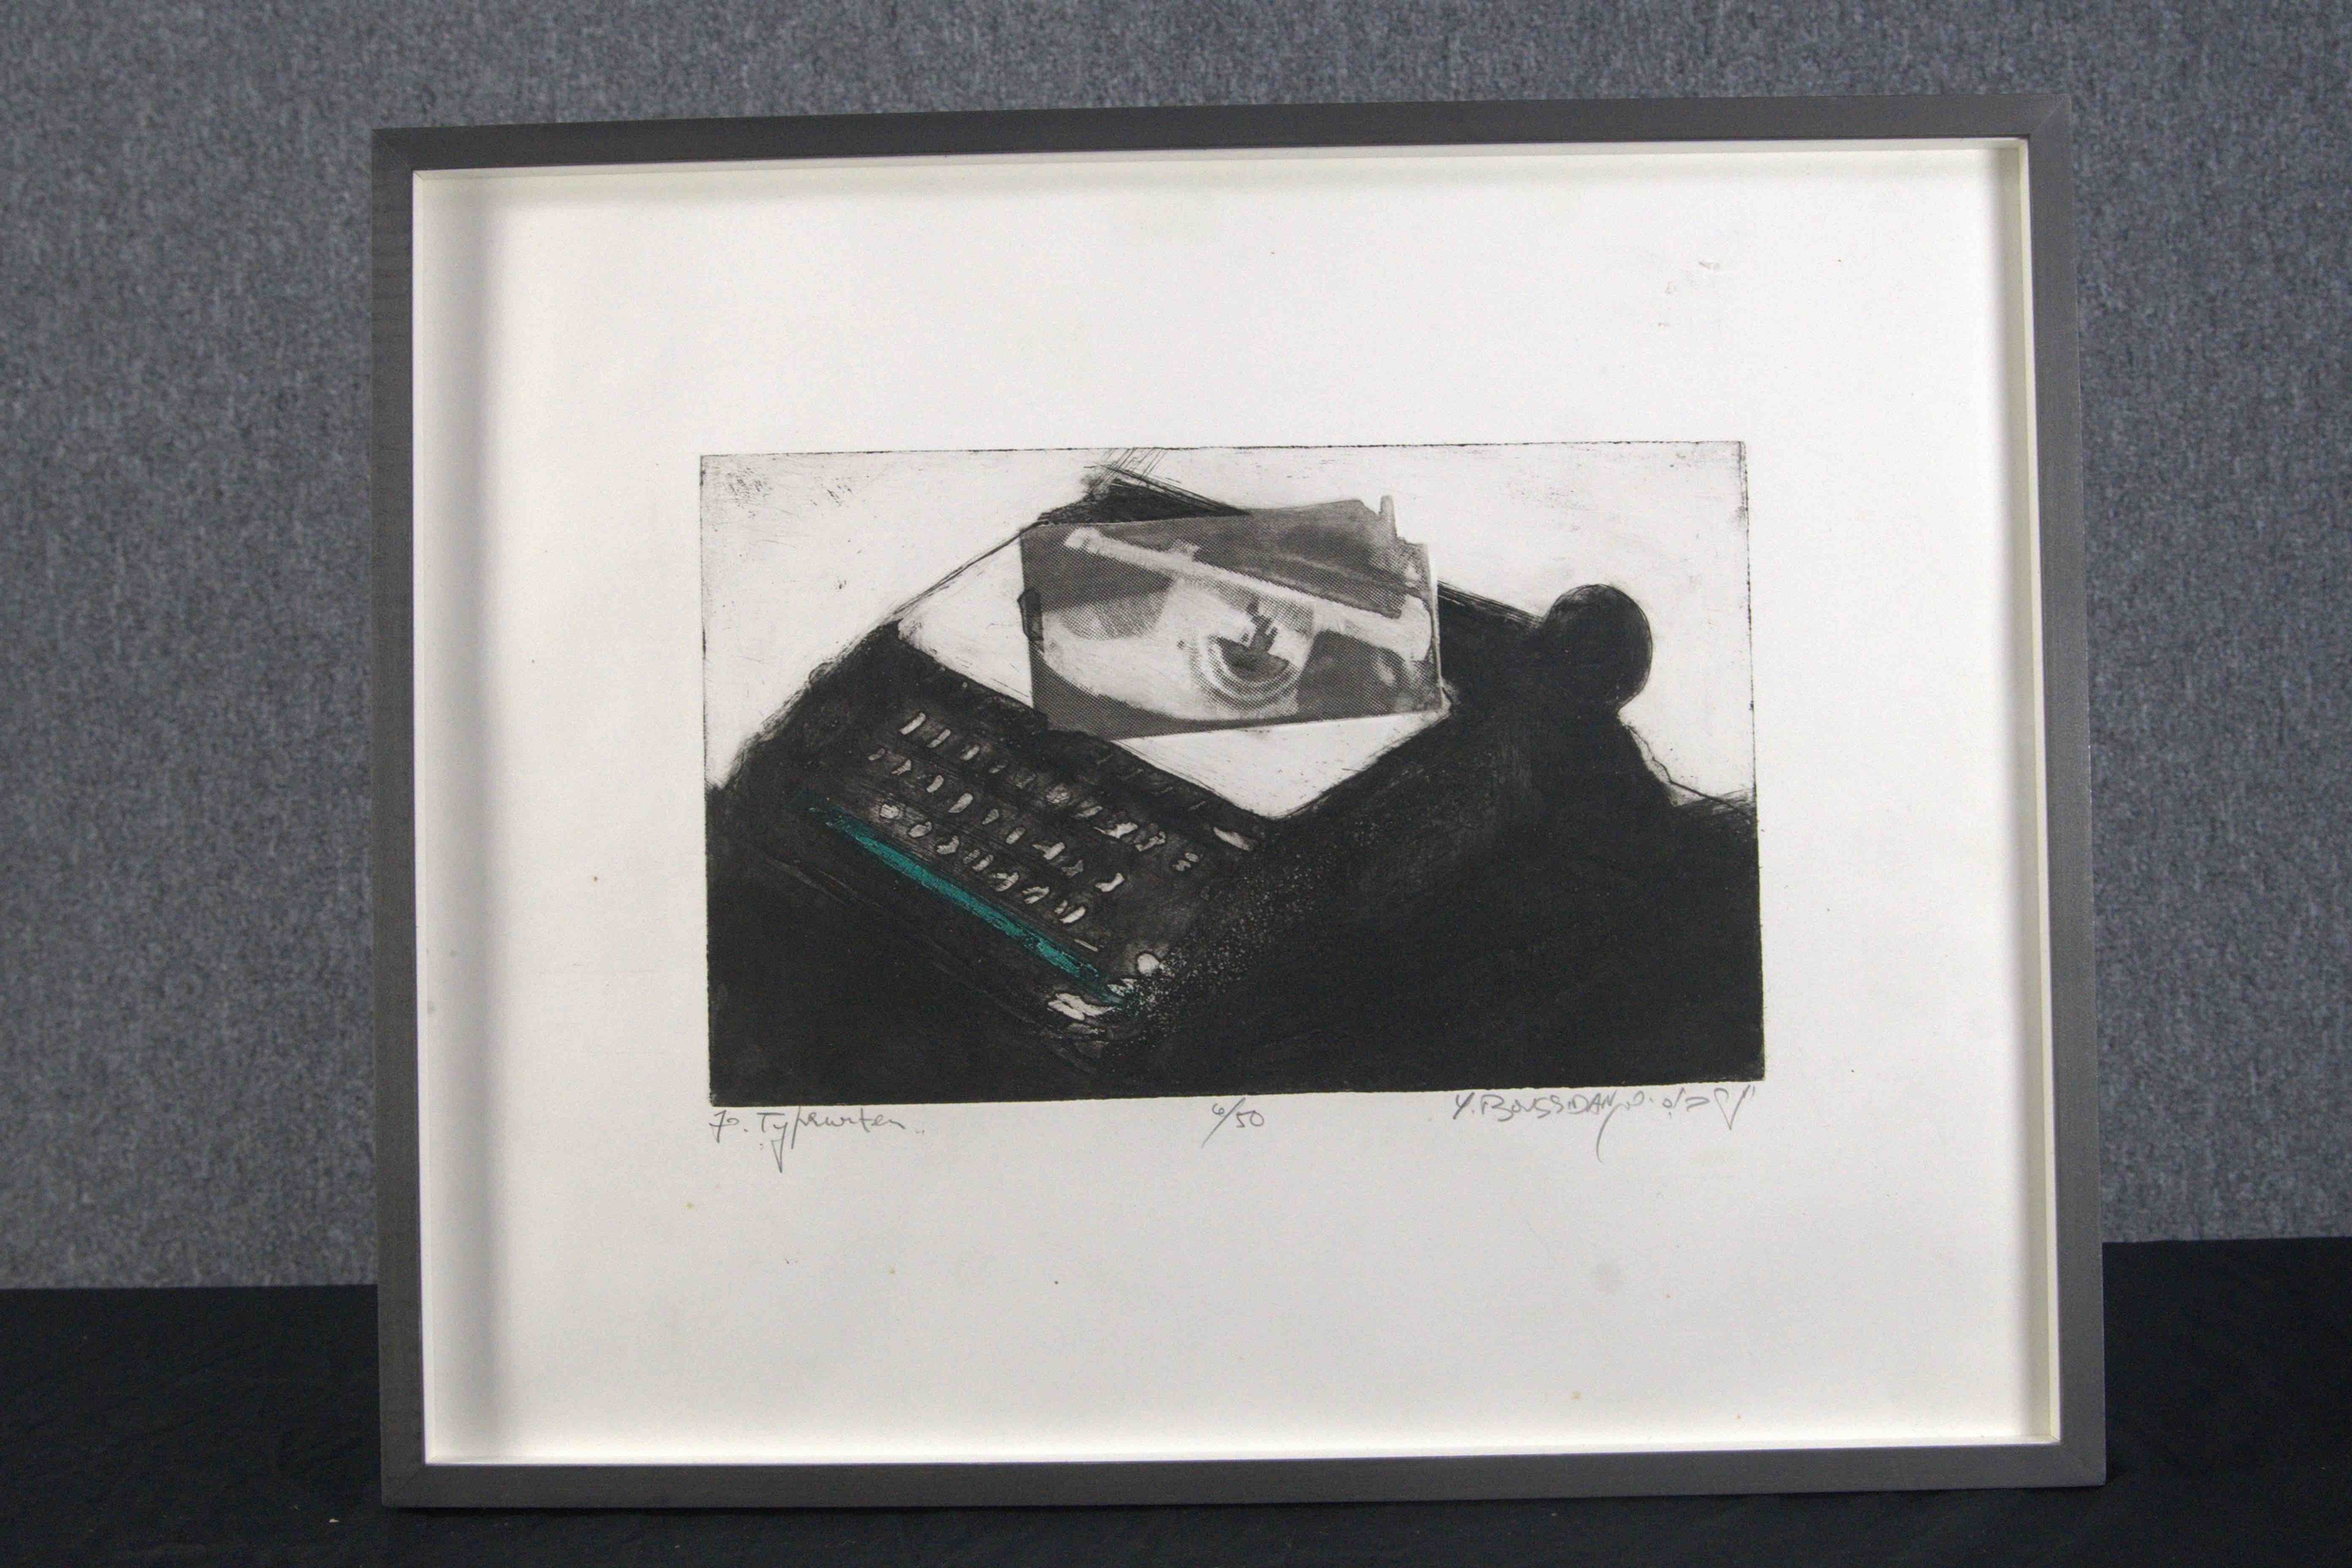 Photograph titled 'Typewriter'. Signed indistinctly bottom right. Framed and glazed. H.50 x W.62 cm. - Image 2 of 5